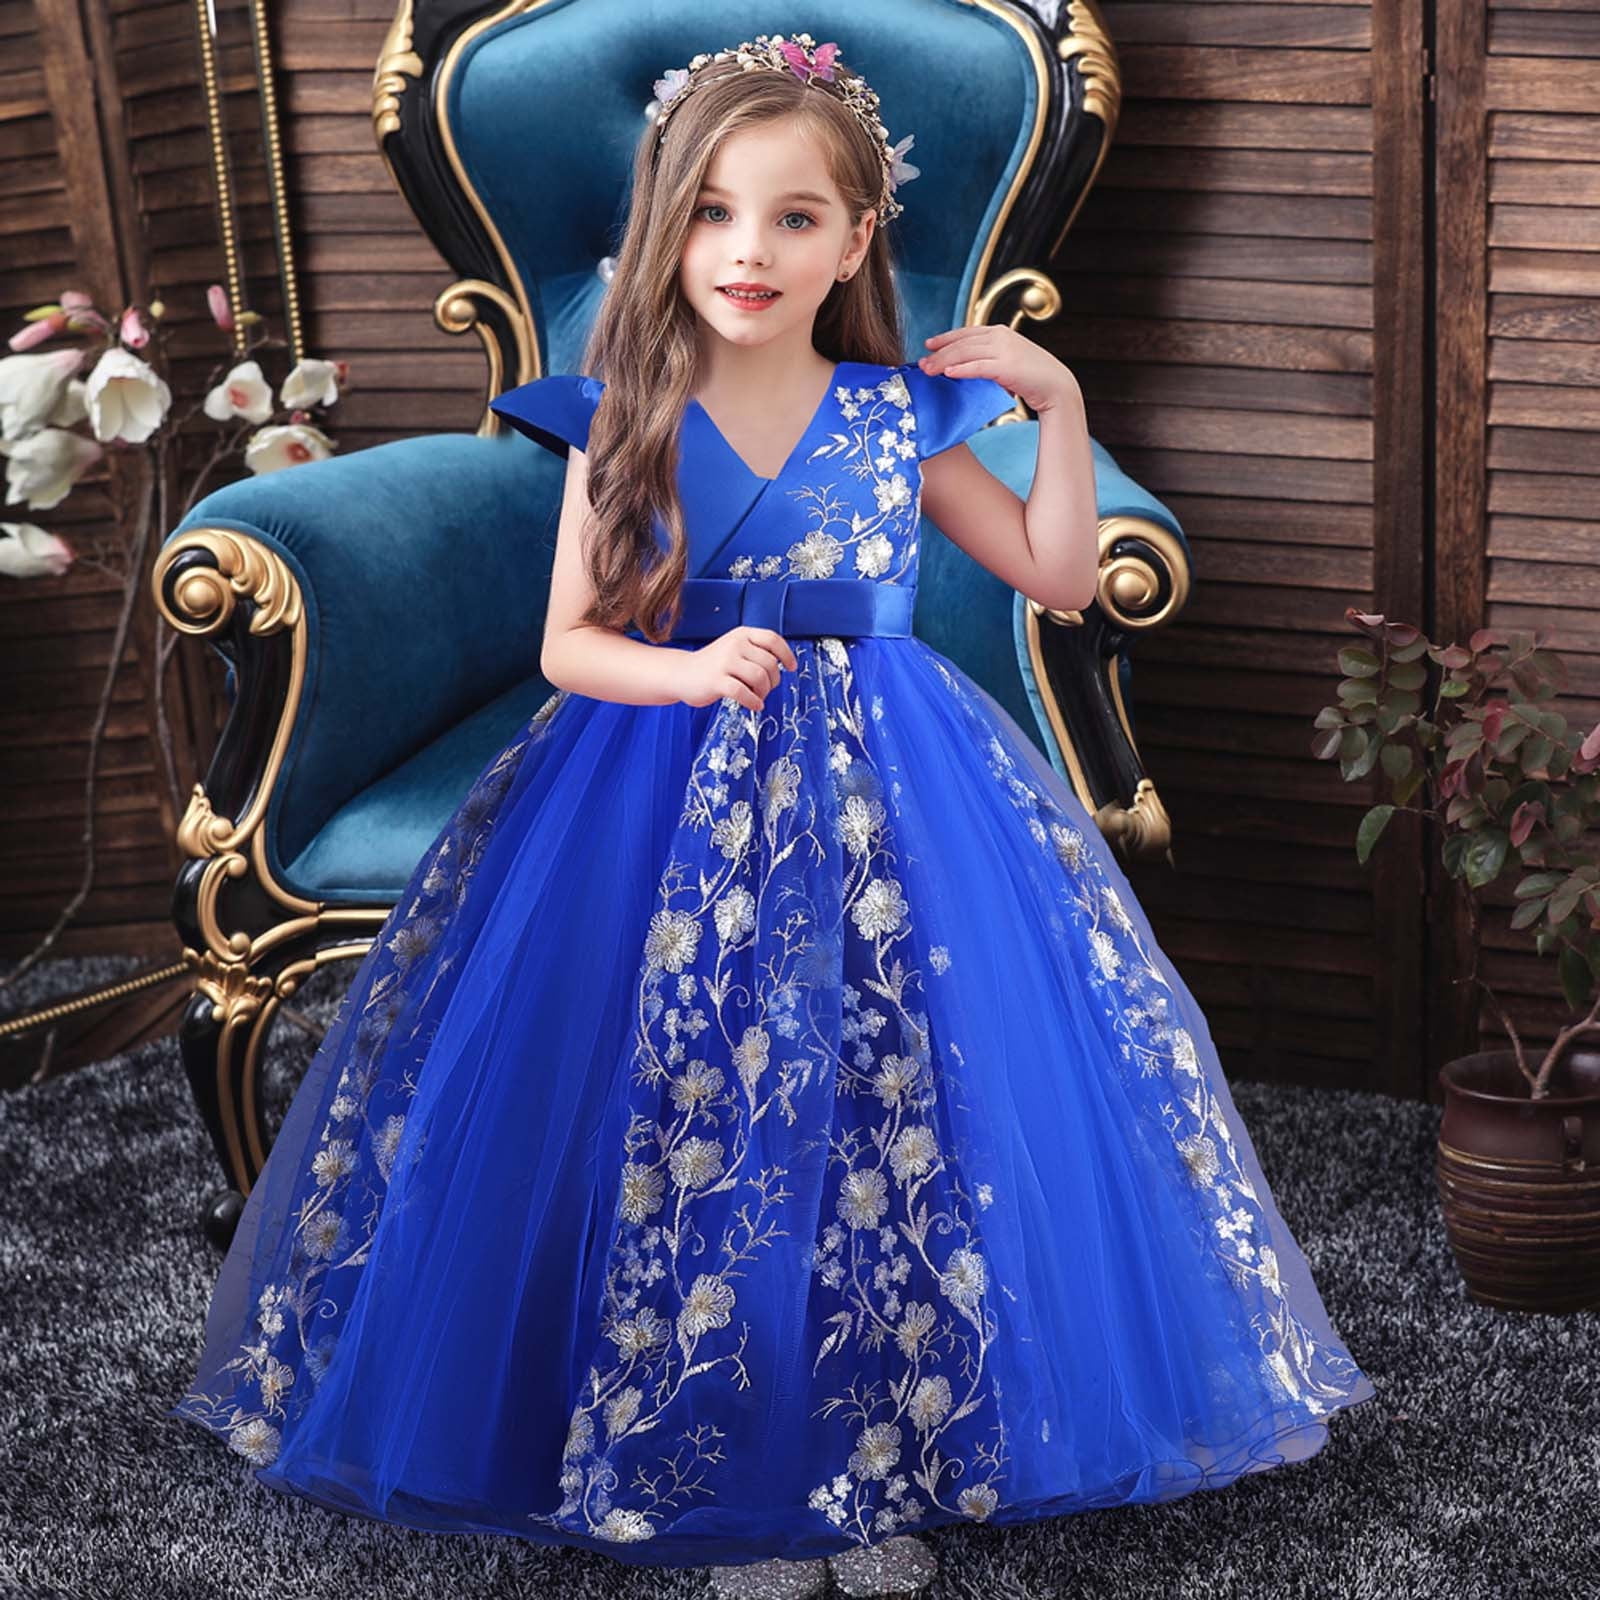 Qubskry Princess Beauty Costume for Women, Girl Princess Belle Dress up  Ball Gown, Halloween Costume Adult Yellow : Amazon.in: Toys & Games